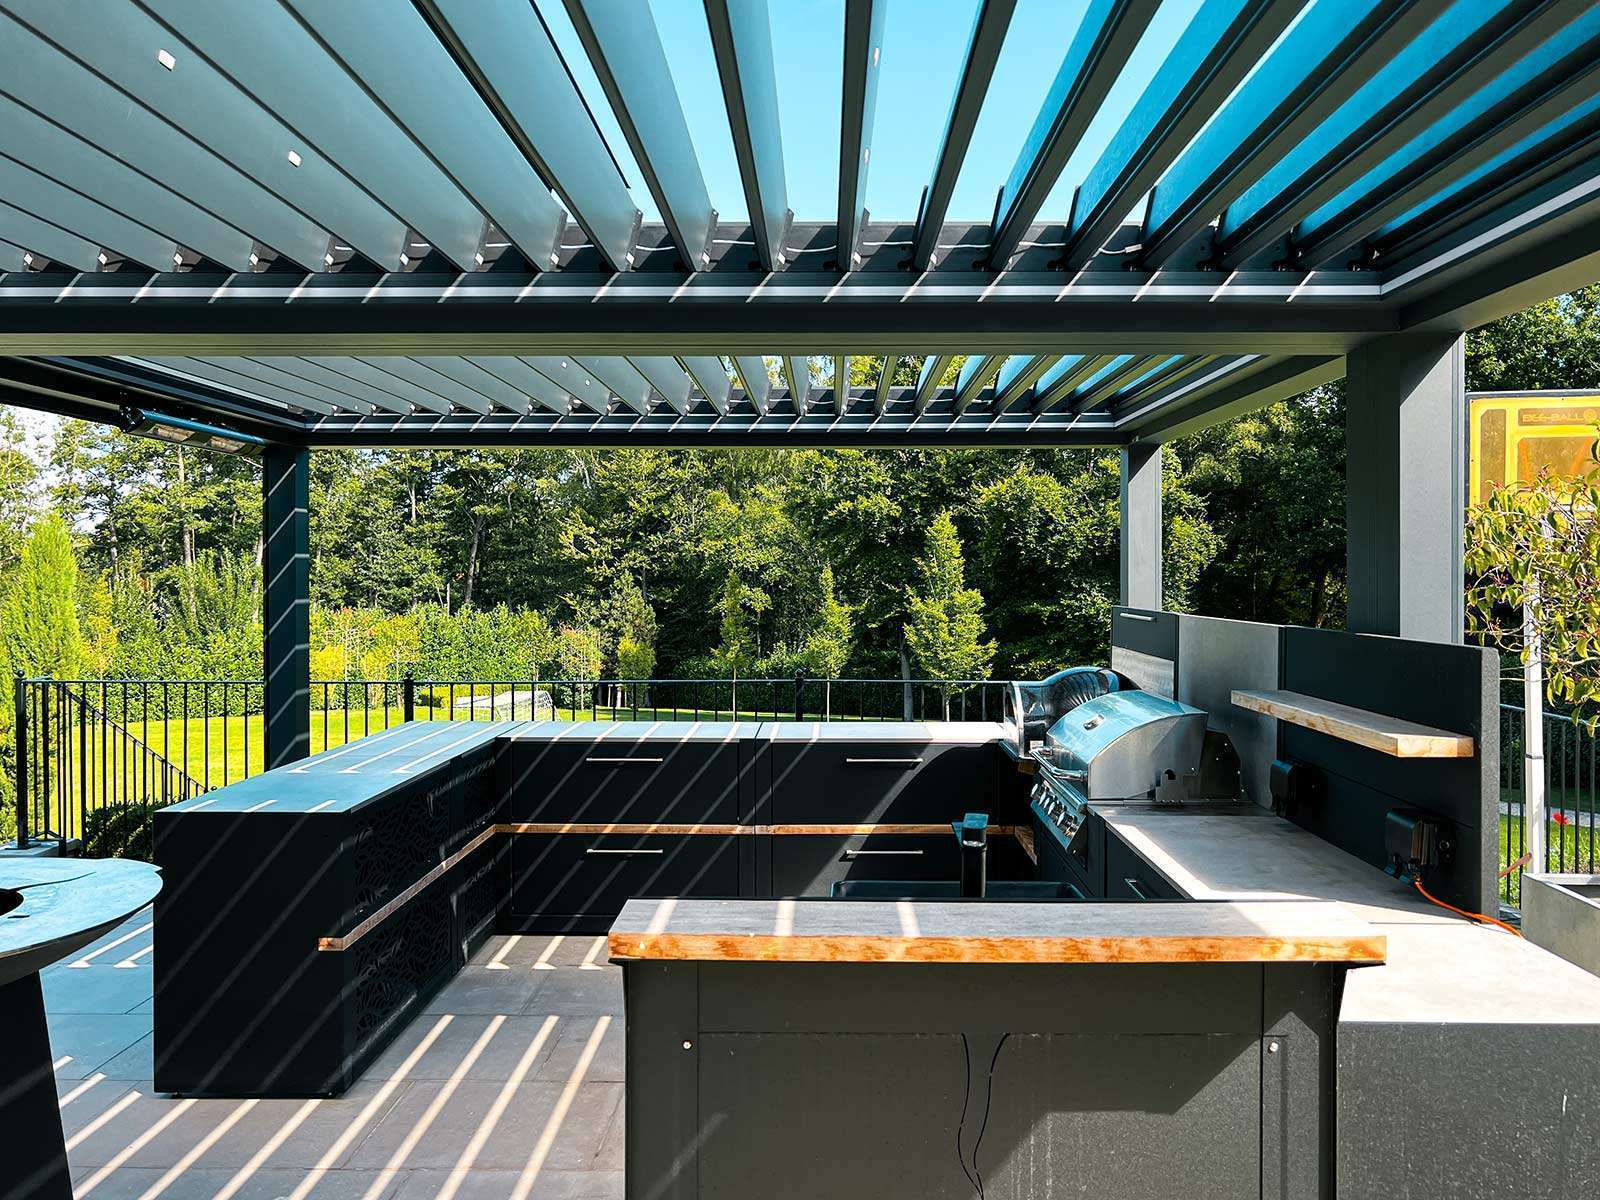 outside bespoke kitchen in black, with a pizza oven, sink, bbq, and storage.